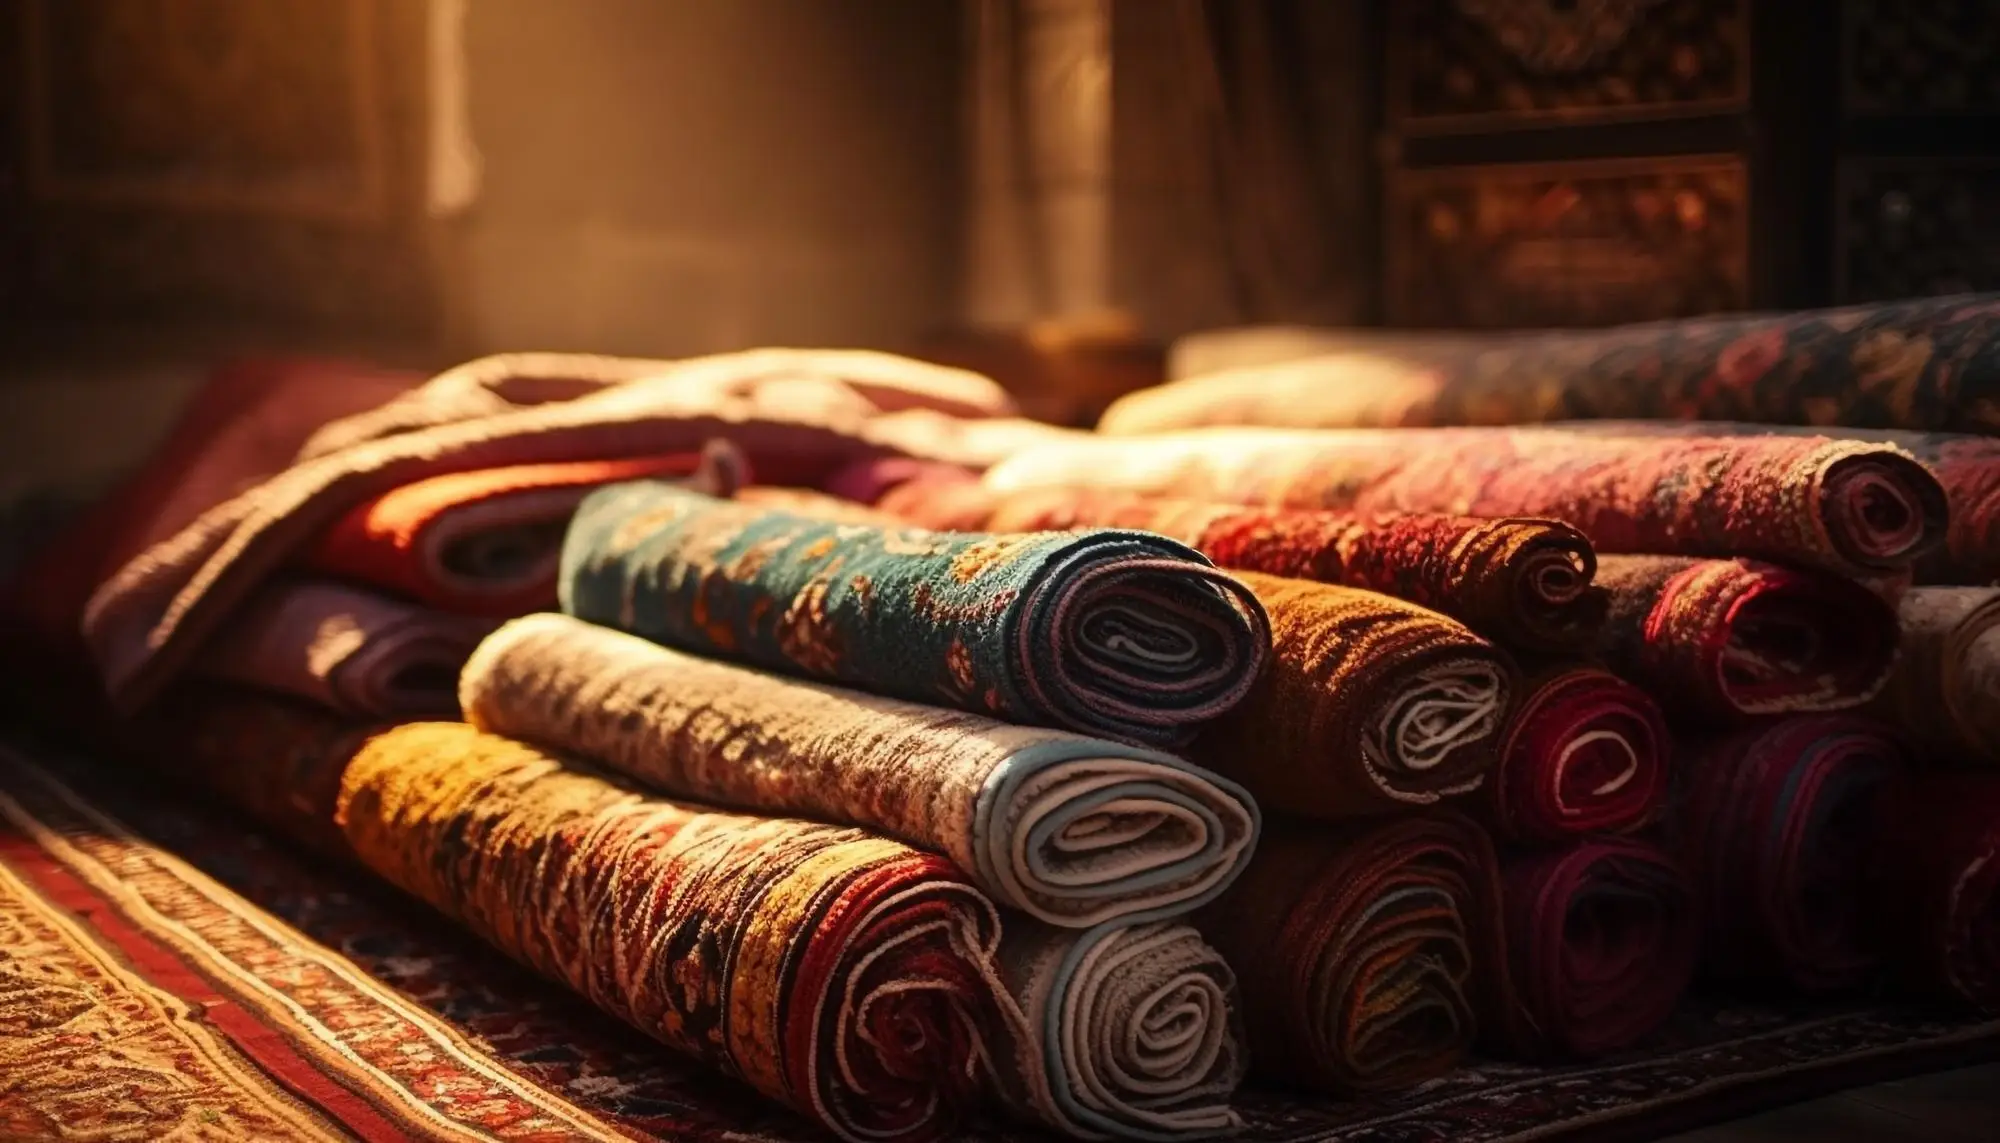 Several rolled-up handwoven and machine-made carpets